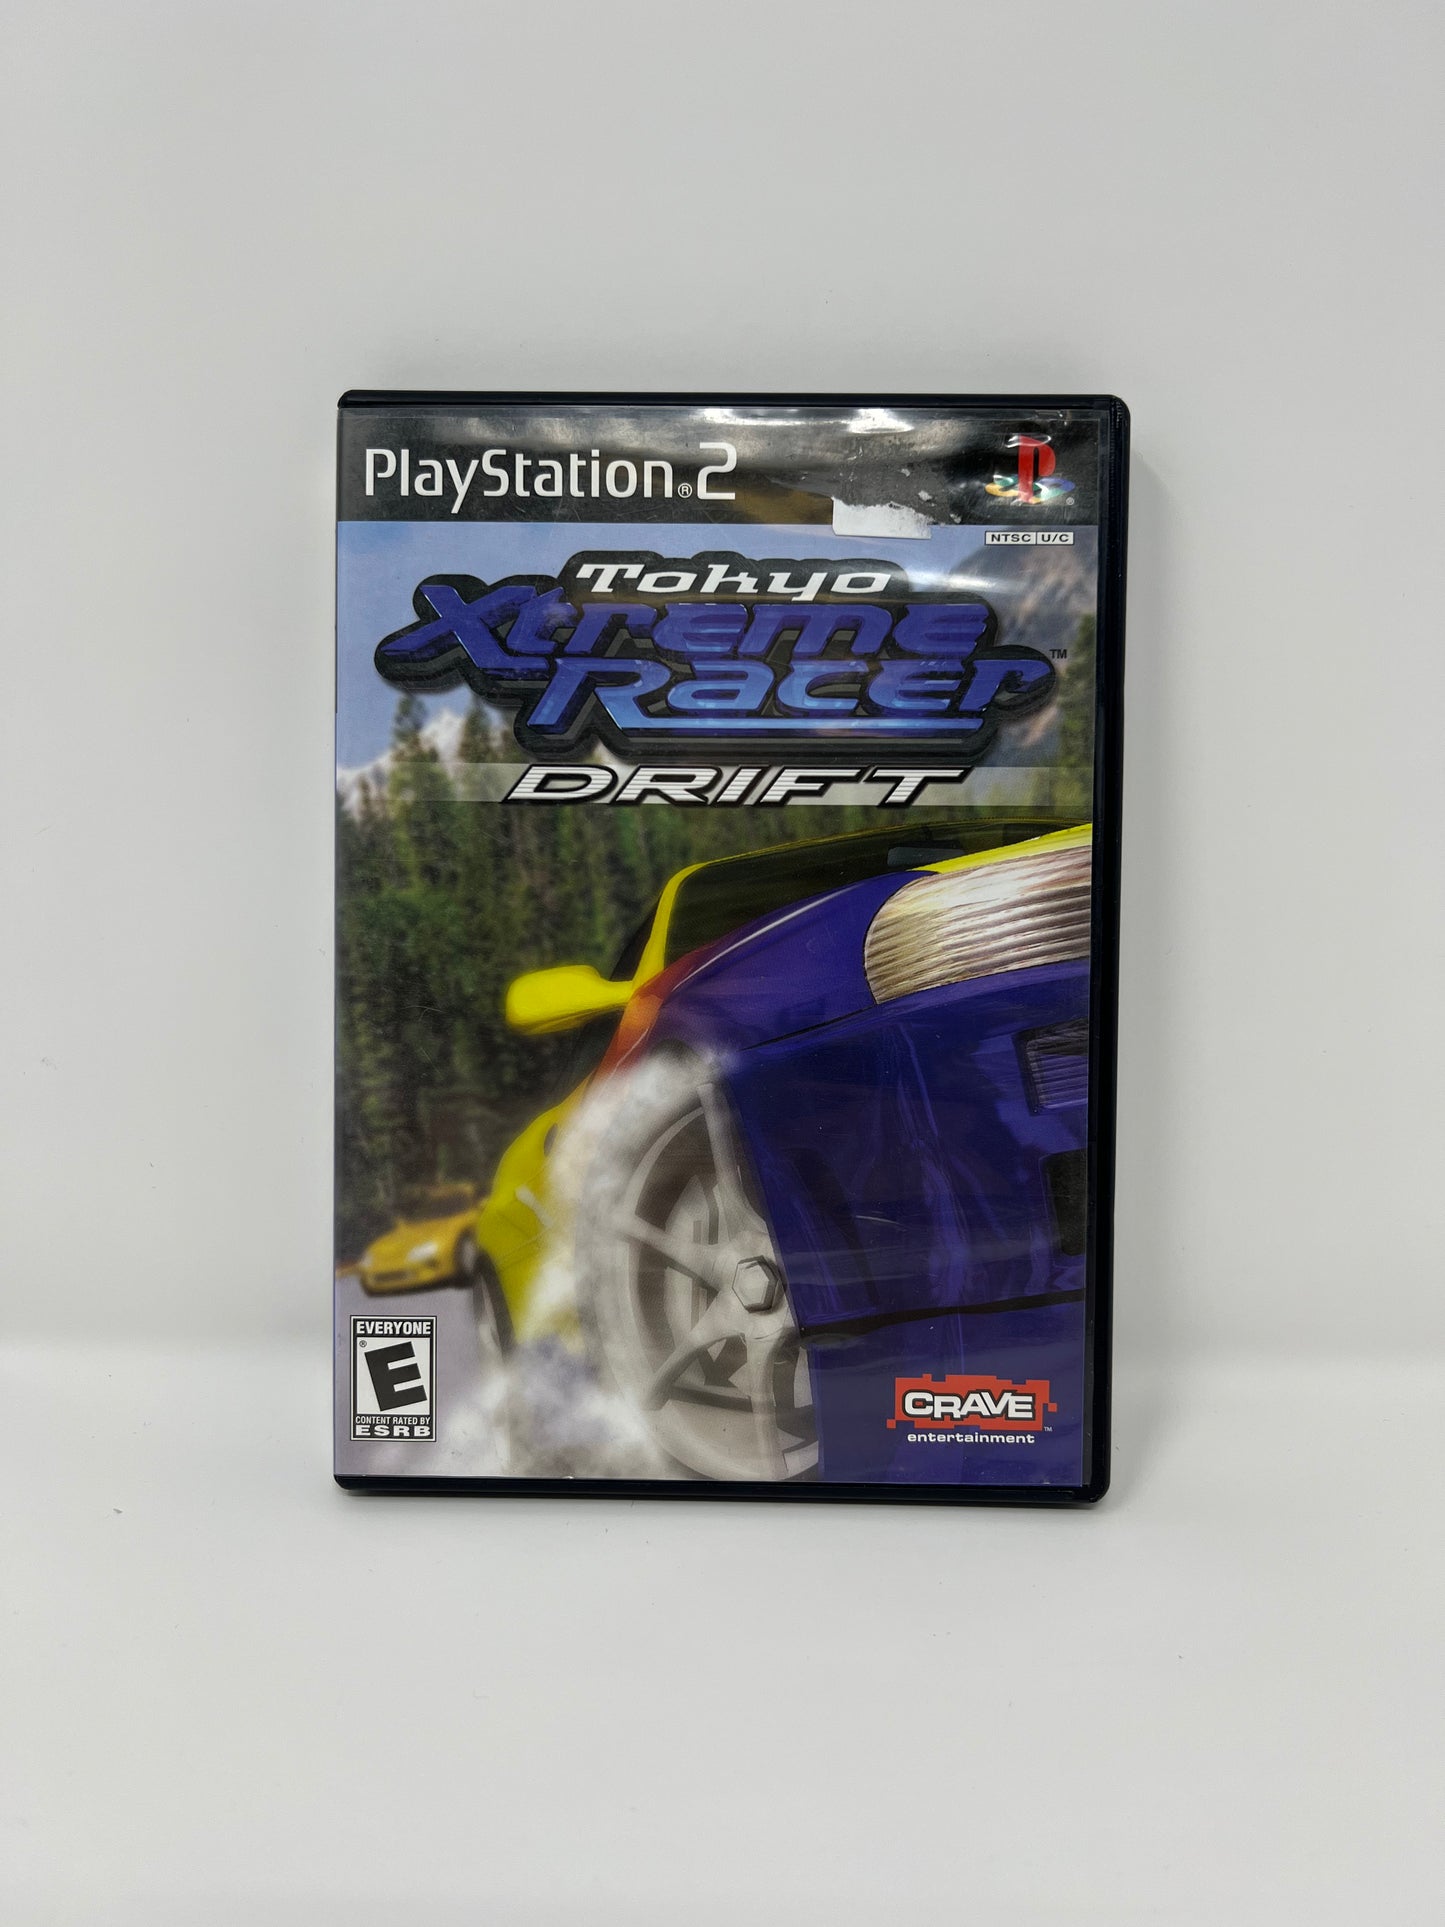 Tokyo Xtreme Racer Drift - PS2 Game - Used